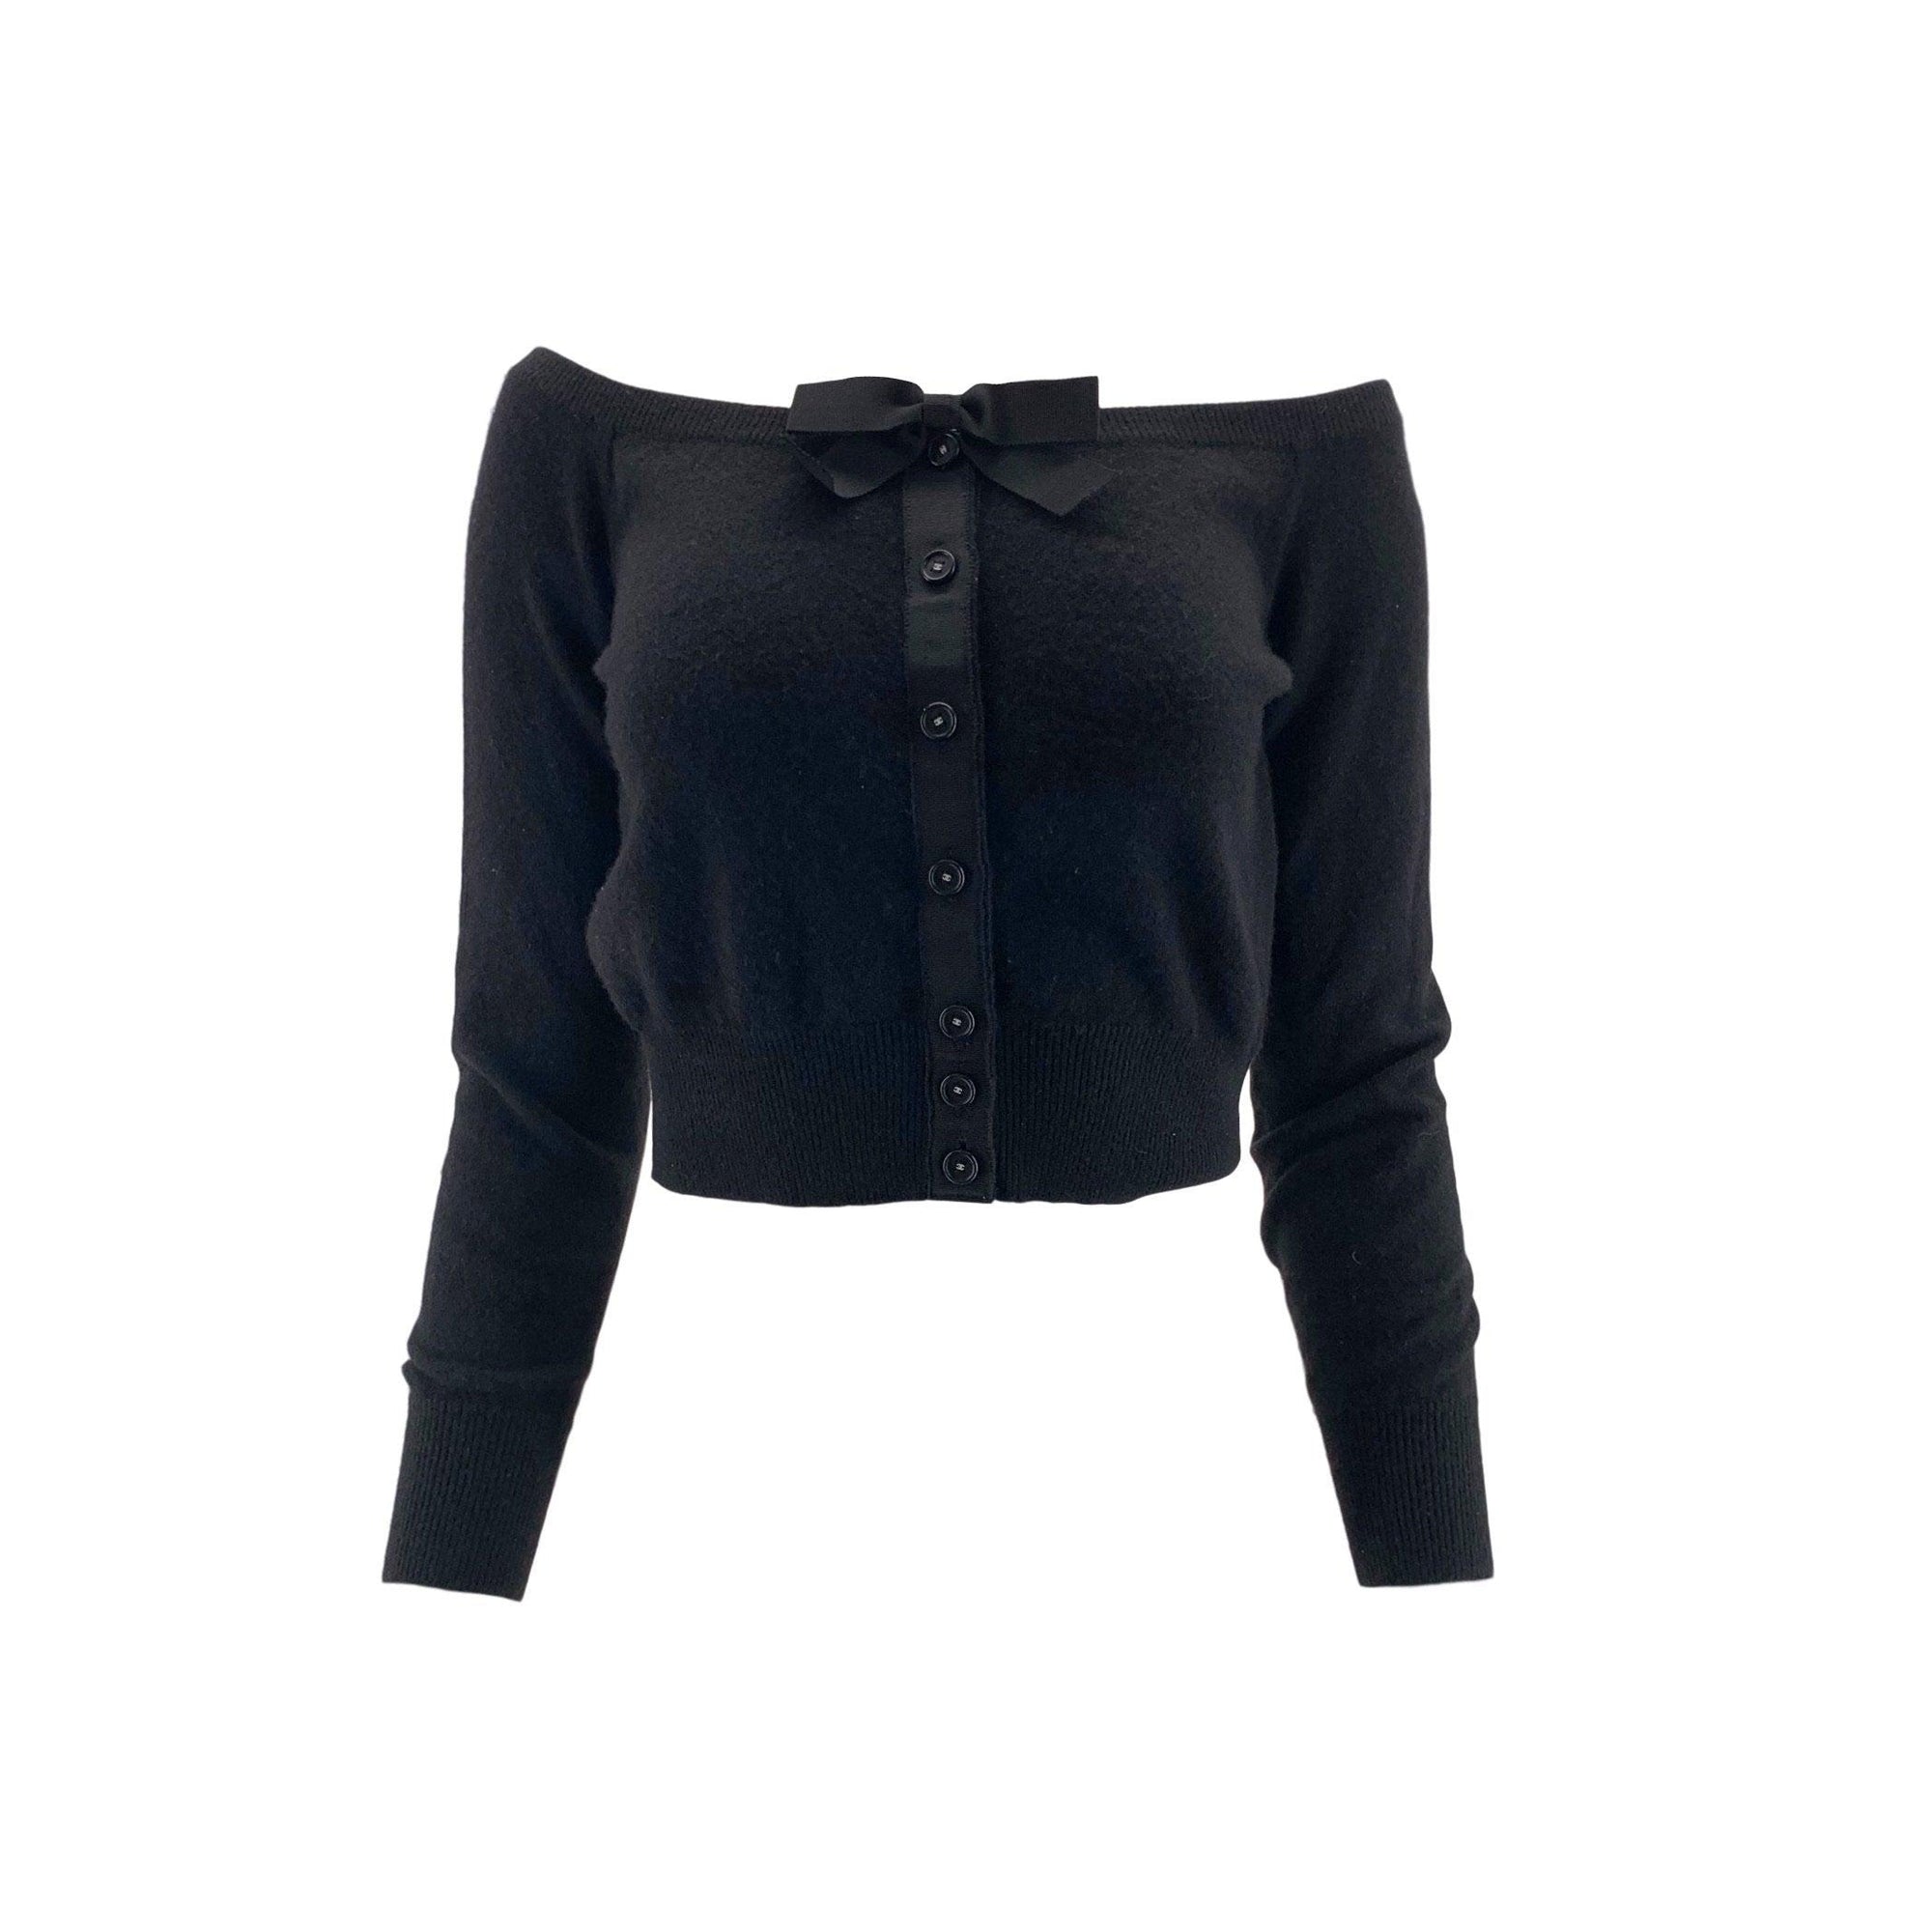 Chanel Black Cashmere Cropped Bow Top